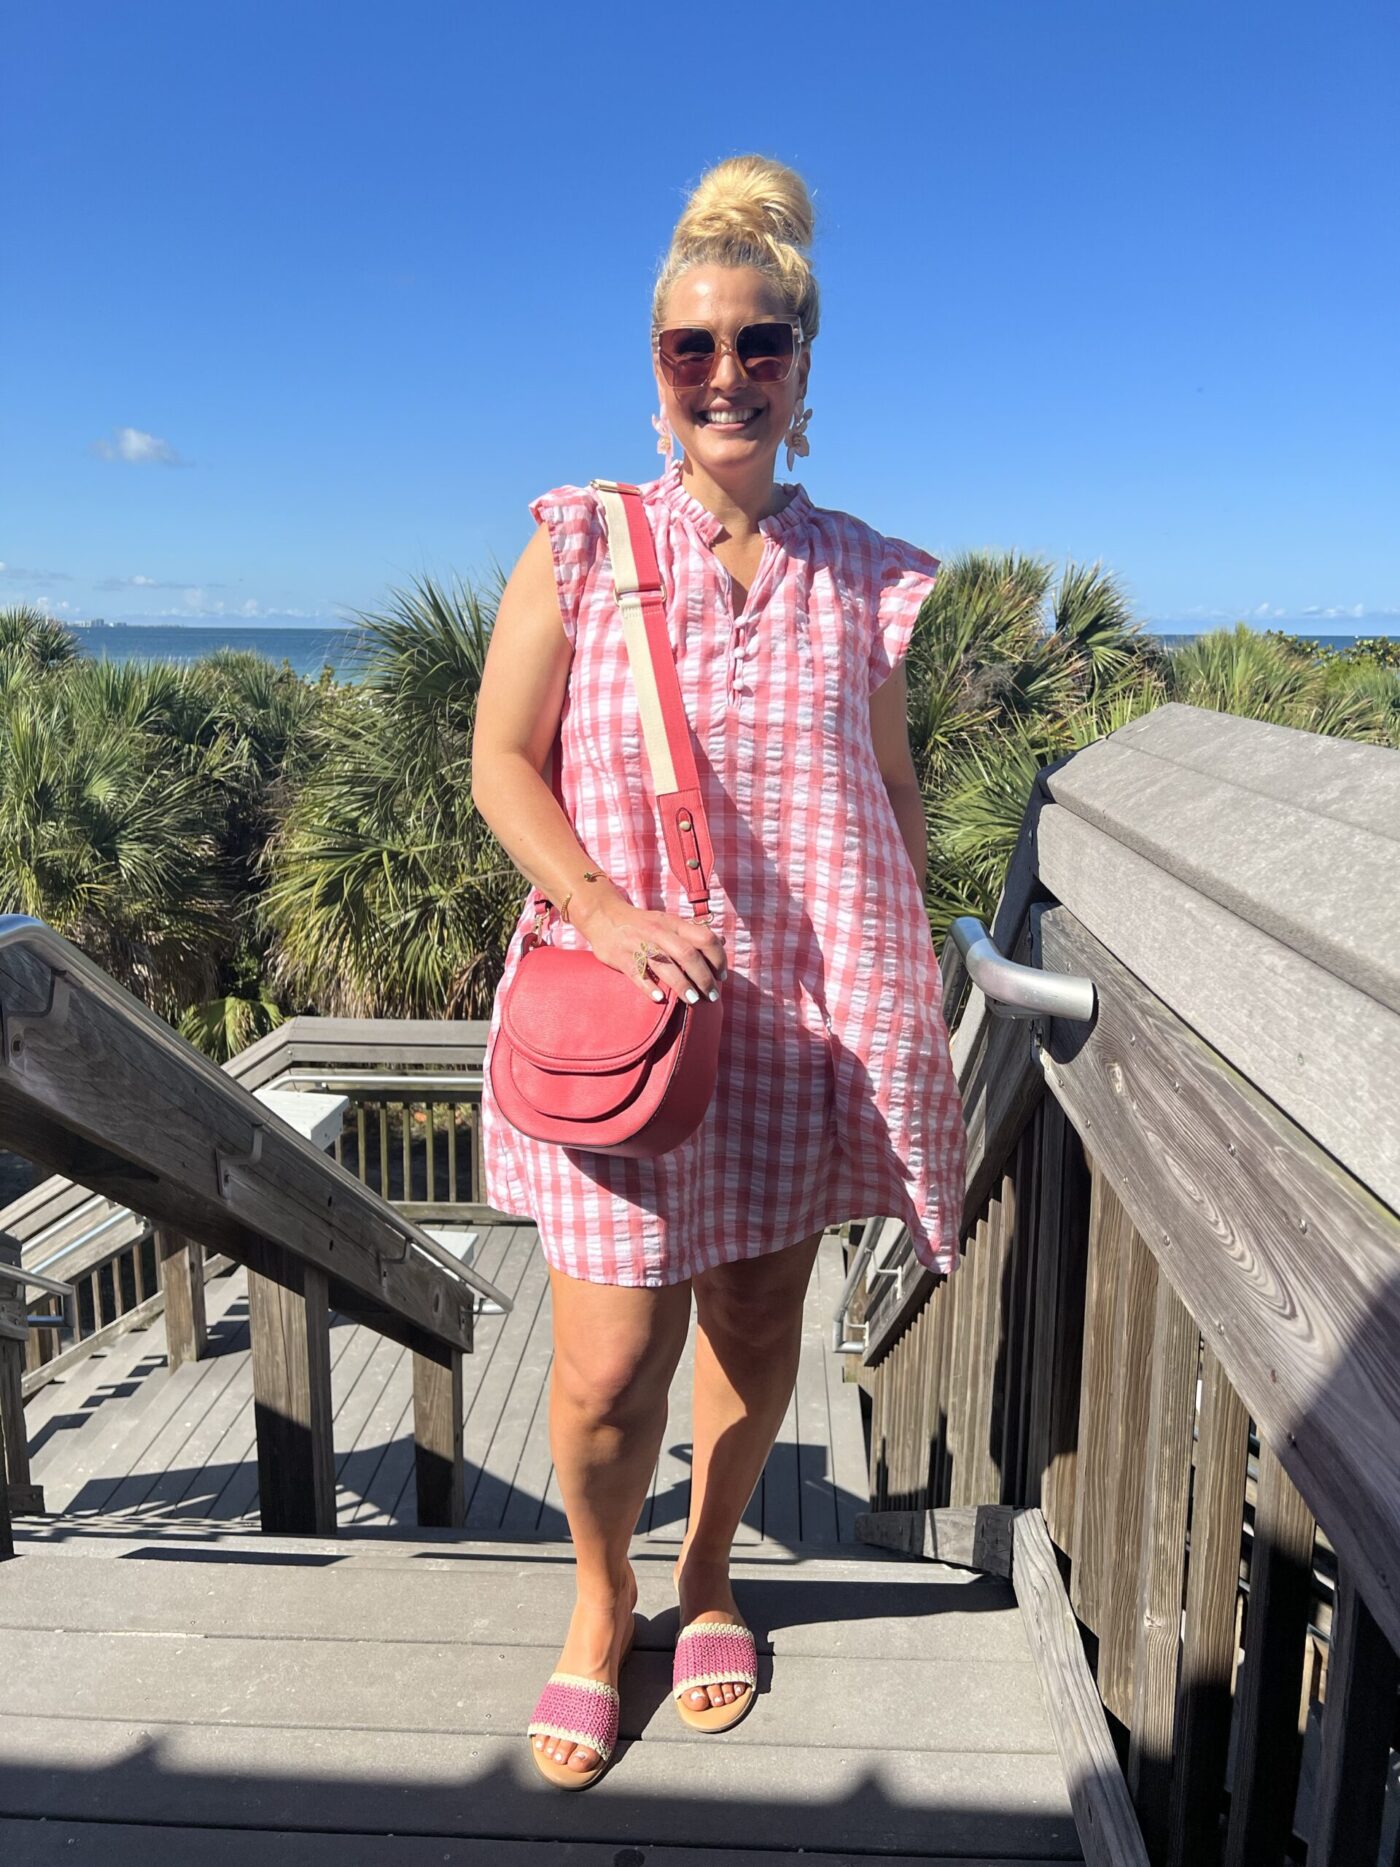 Jenn Truman, Fashion Blogger @JTSTJTST11 is standing on a stair case in Dunedin, FL wearing a pink and white gingham flutter sleeve mini dress while smiling.